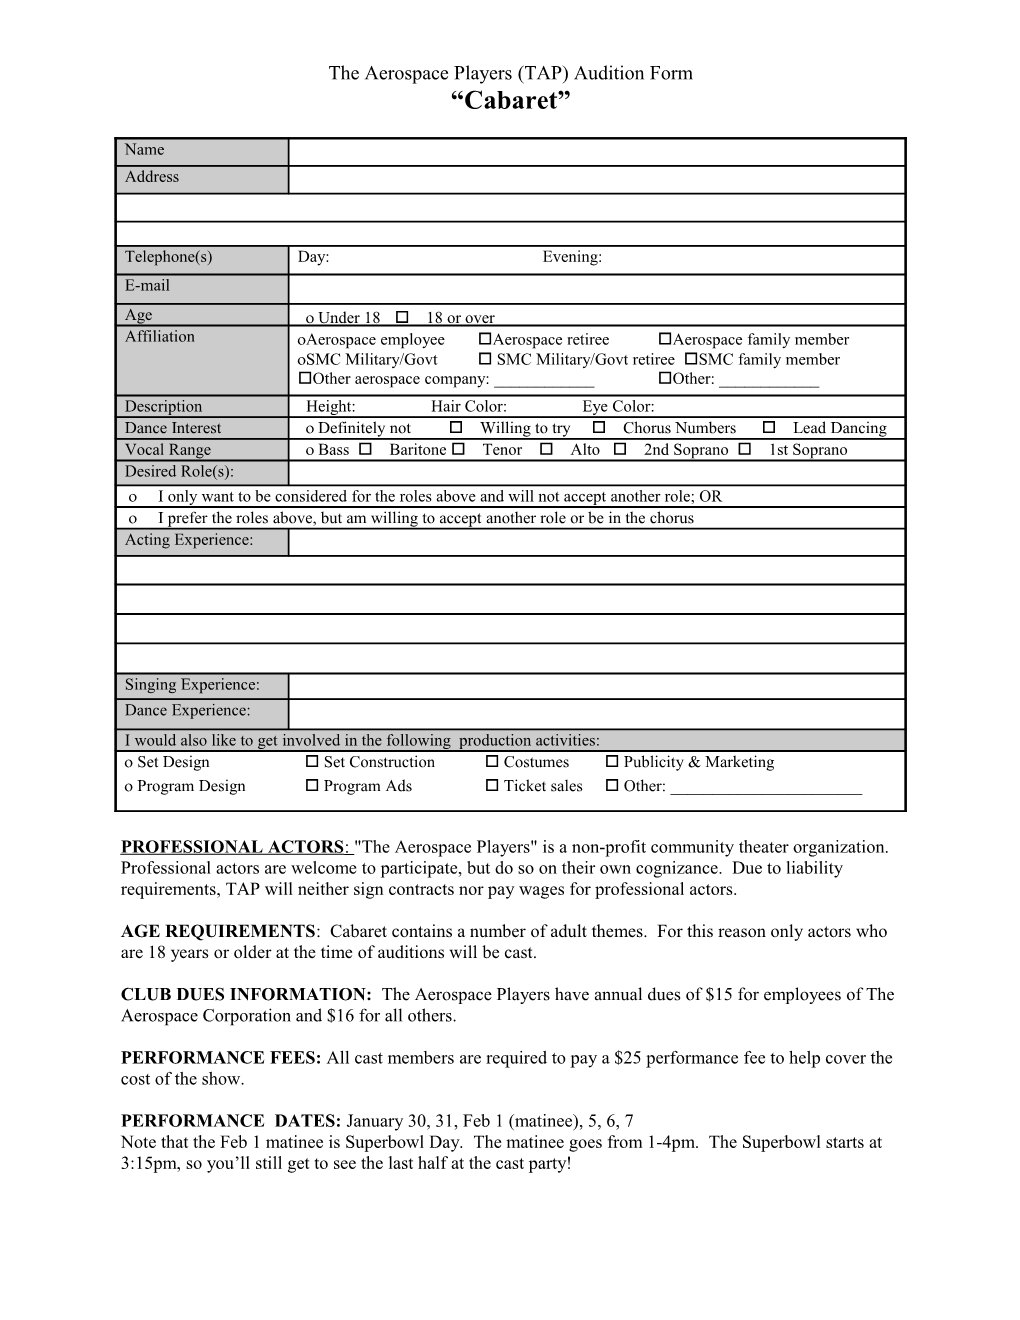 AEA Audition Form